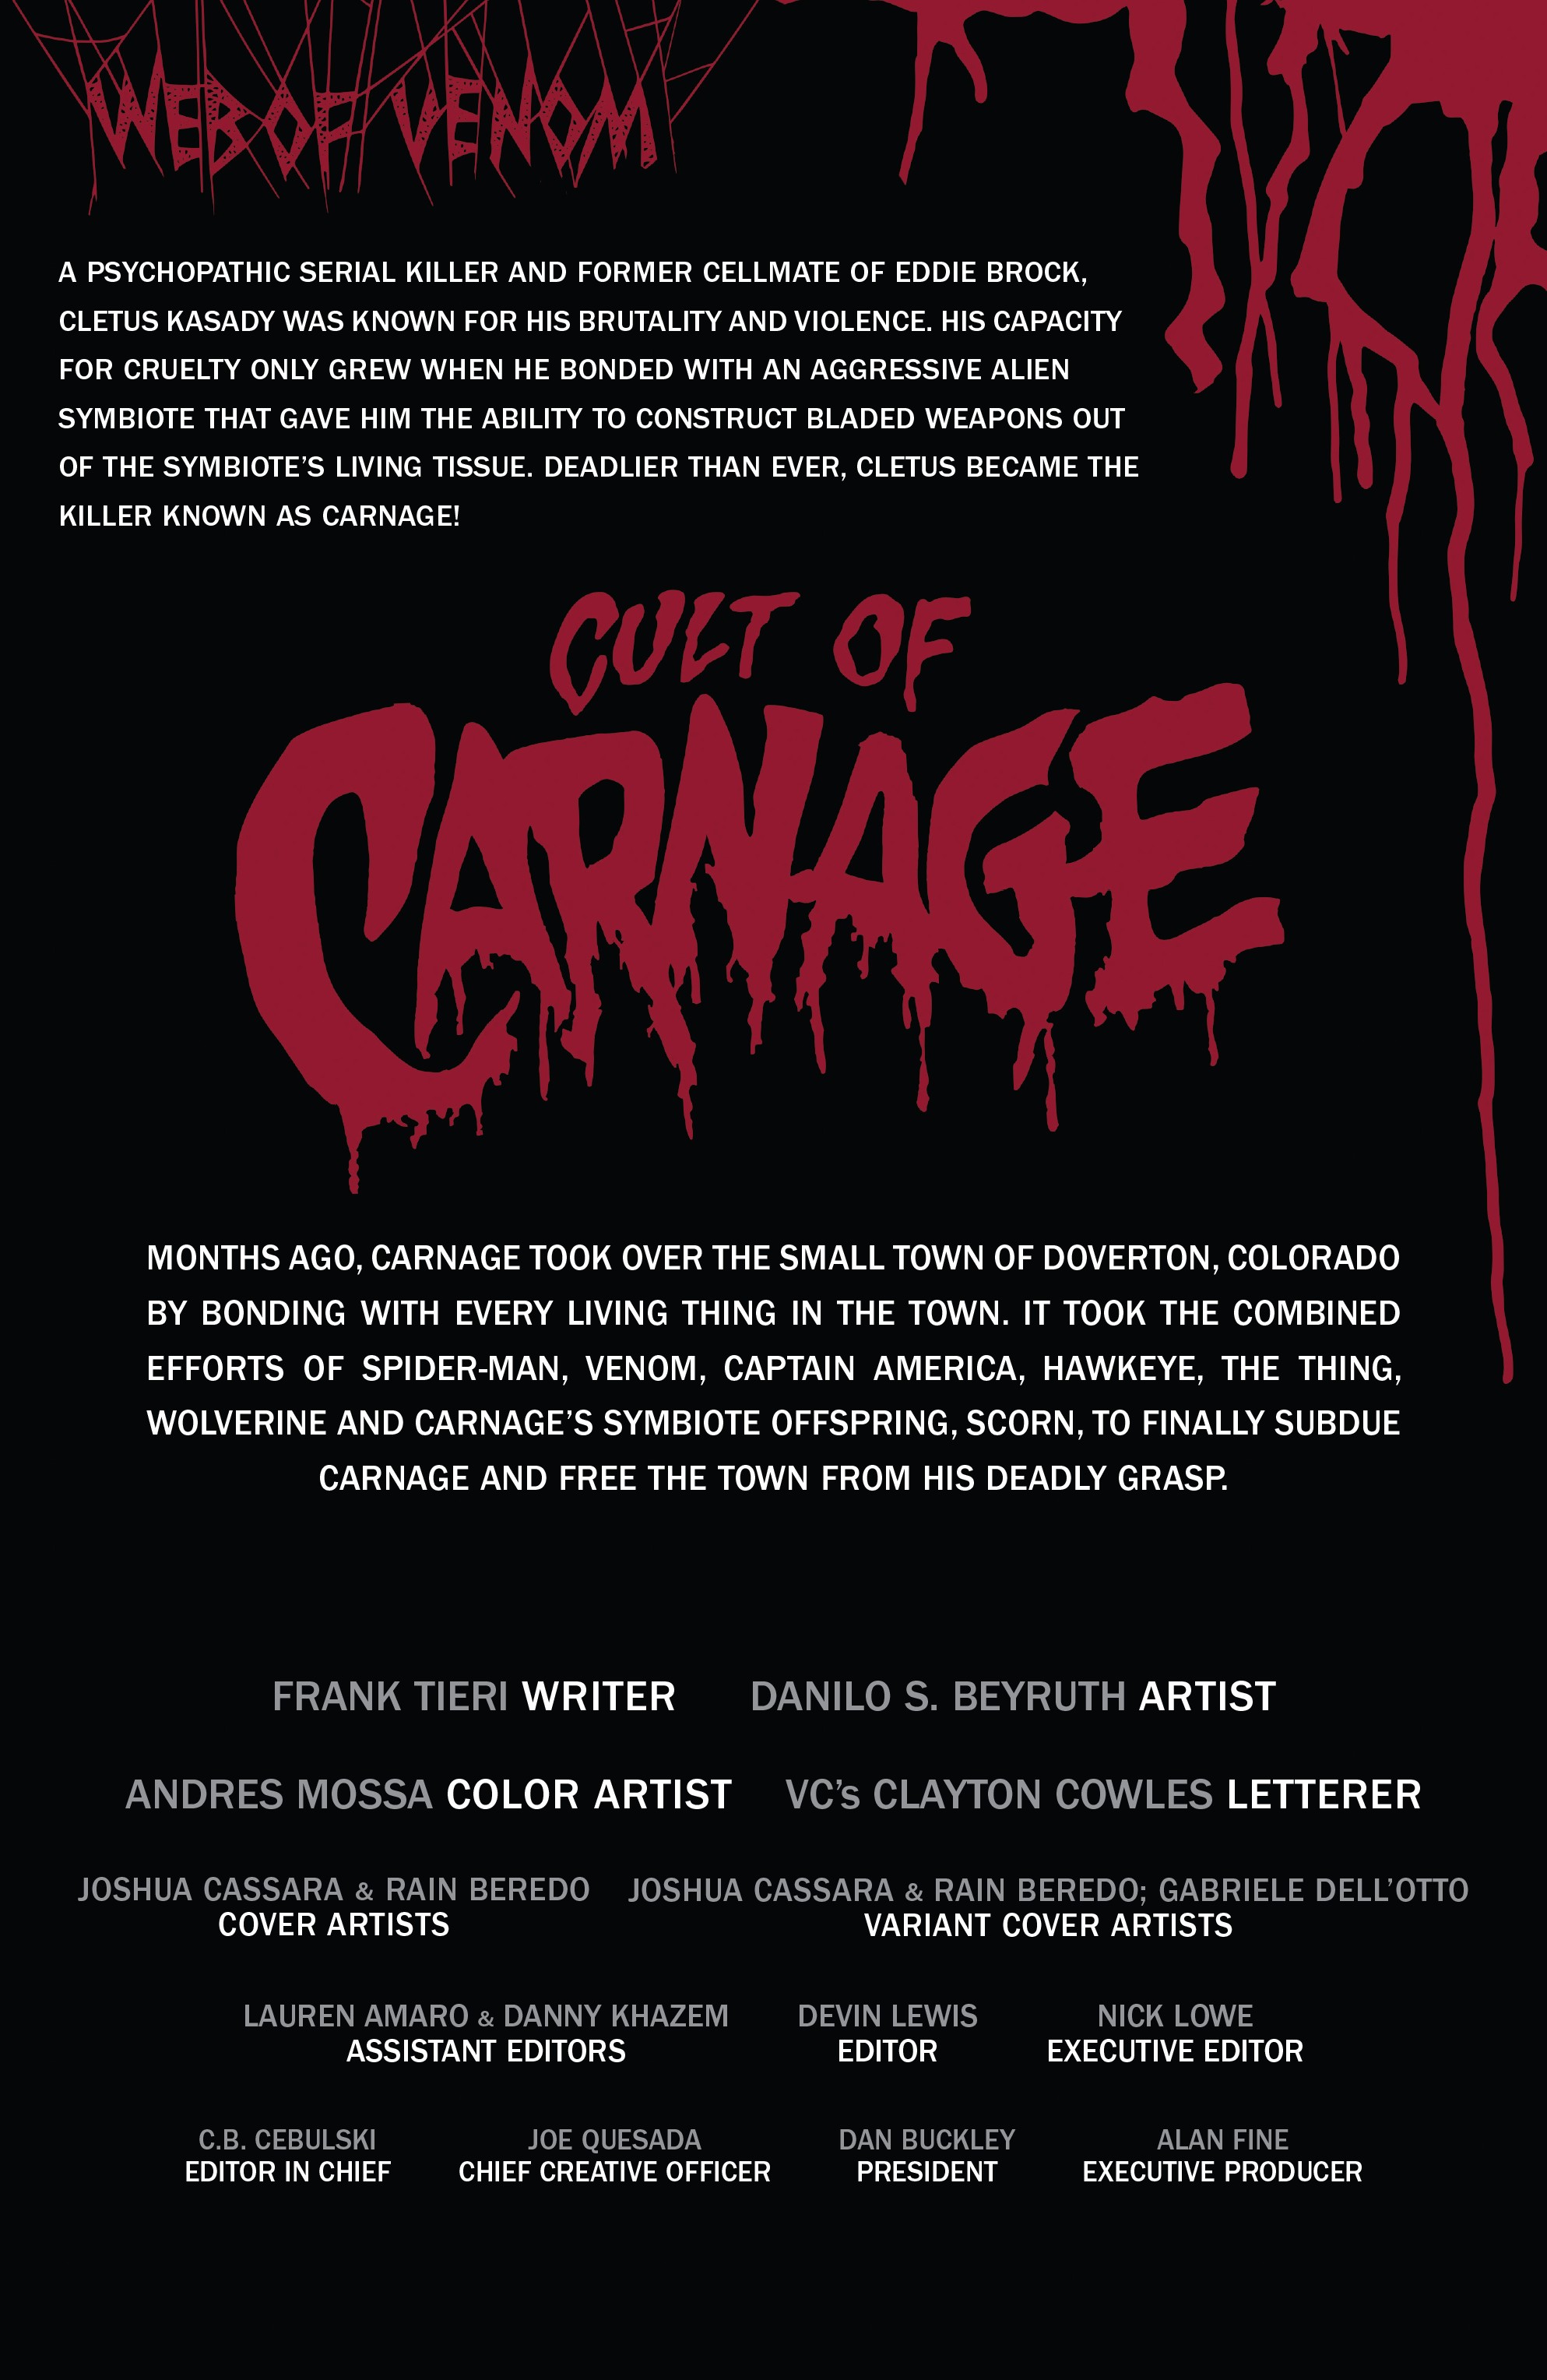 Read online Web of Venom: Cult of Carnage comic -  Issue # Full - 2